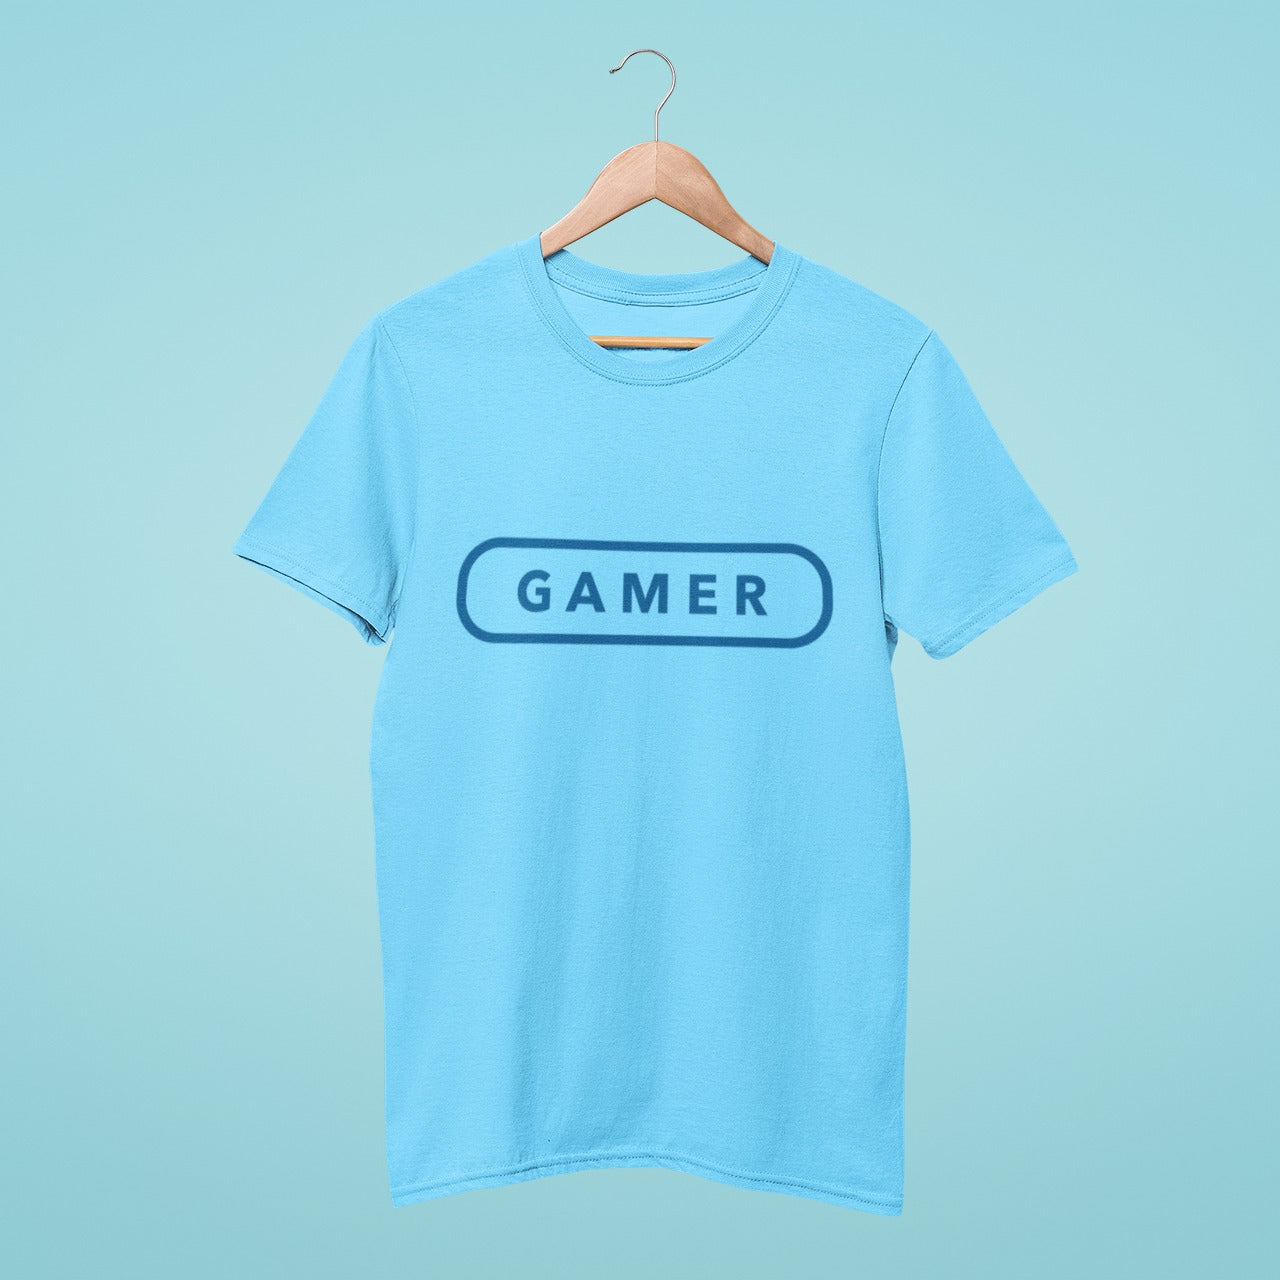 Game On! This navy blue t-shirt featuring 'Gamer' in a game button style is perfect for any gaming enthusiast. With its comfortable fit and stylish design, it's the perfect addition to your gaming wardrobe. Get ready to level up your style game with this trendy tee!